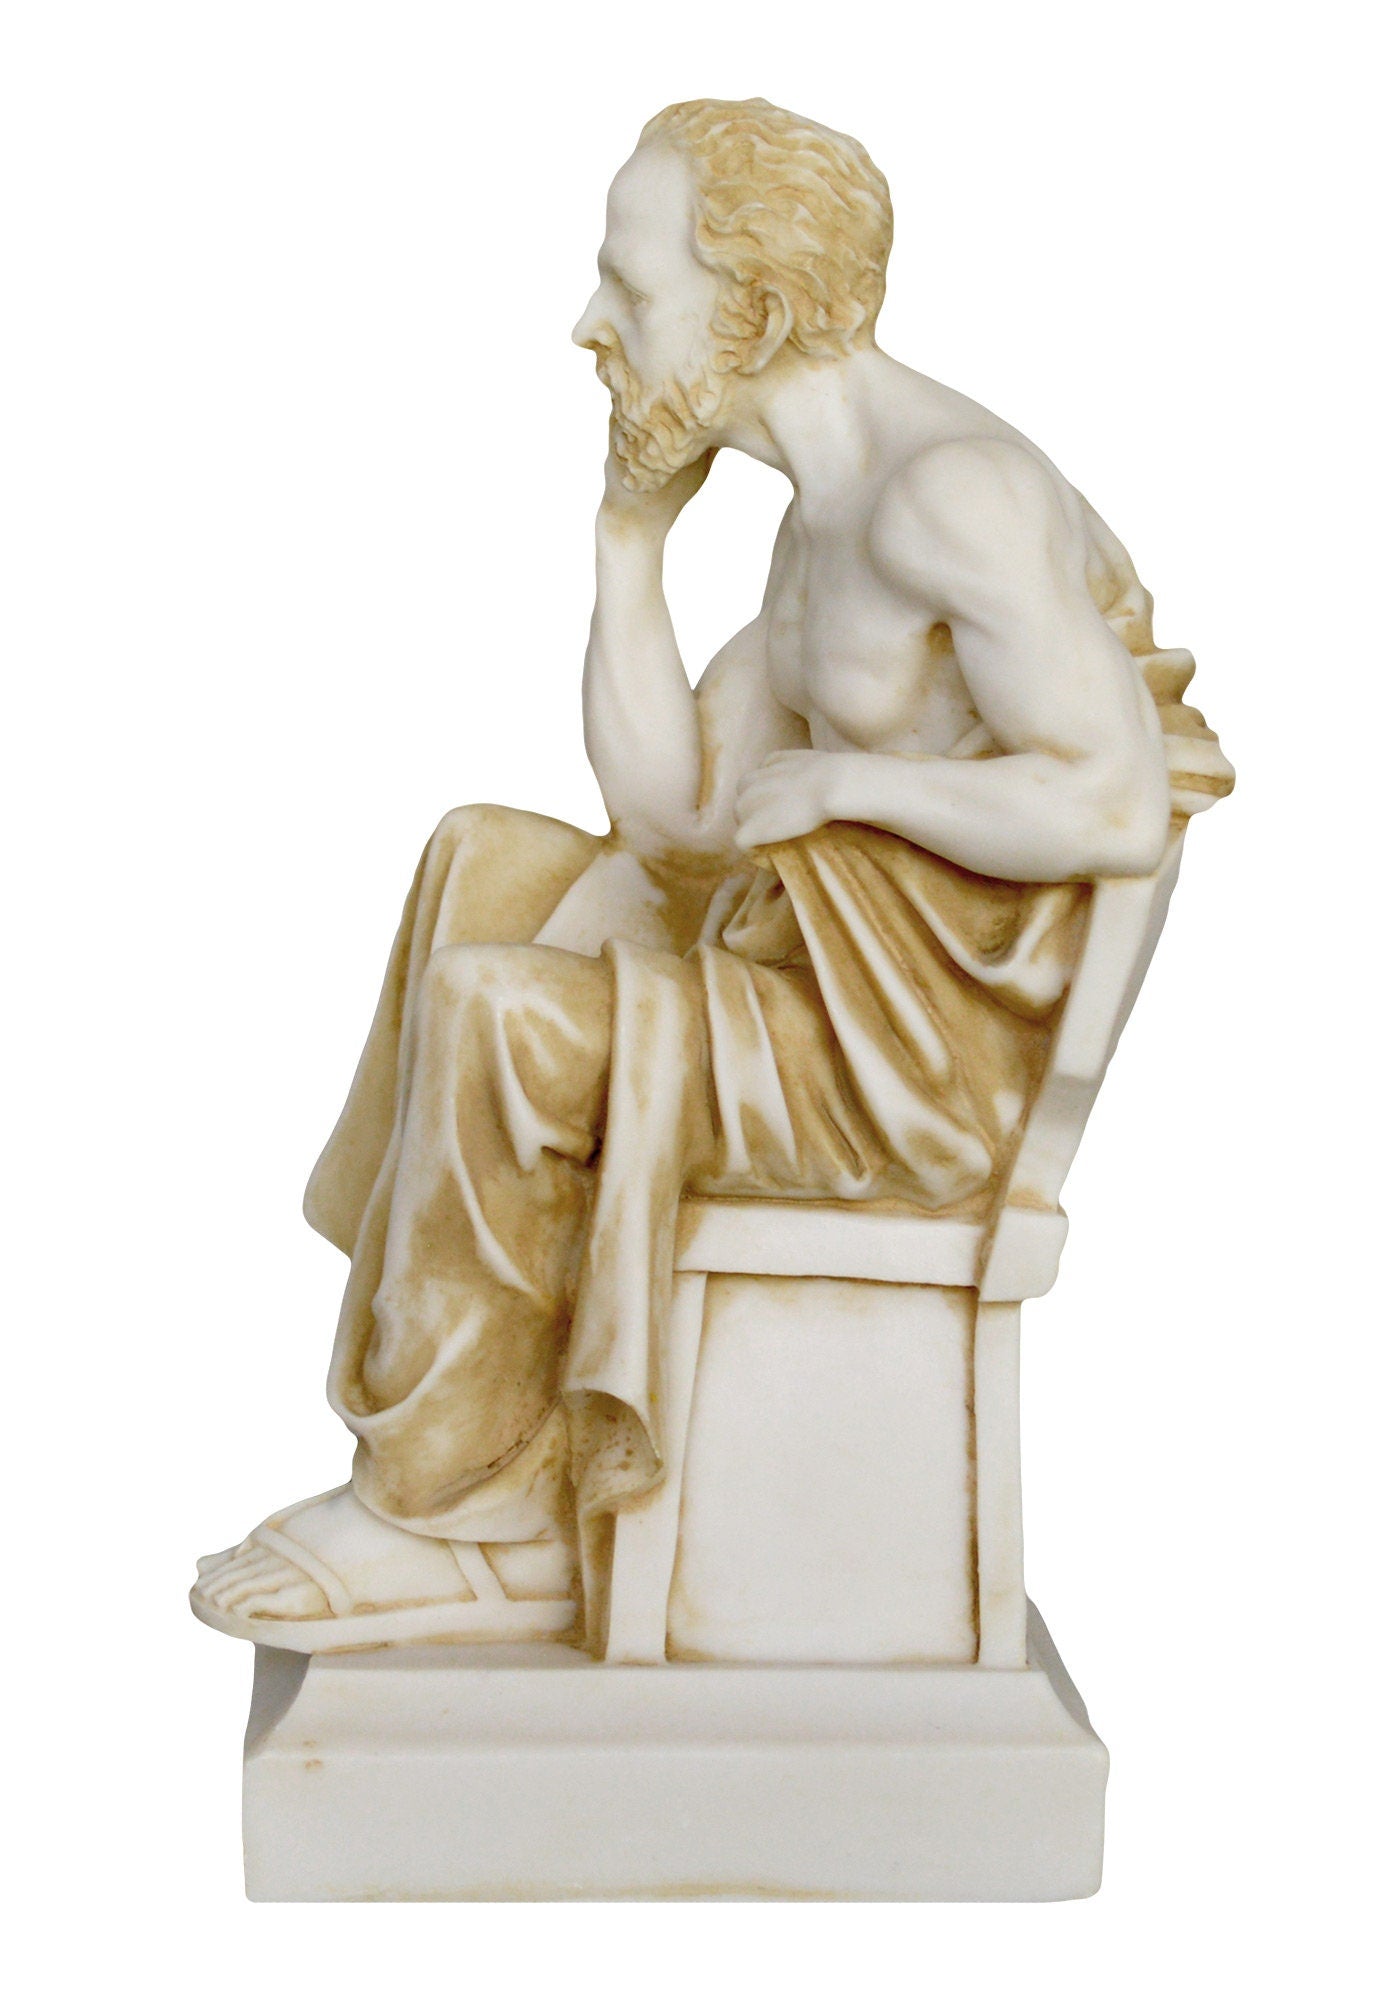 Socrates - Ancient Greek Philosopher - 470-399 BC - Teacher of Plato - Father of Western Philosophy - Aged Alabaster Sculpture